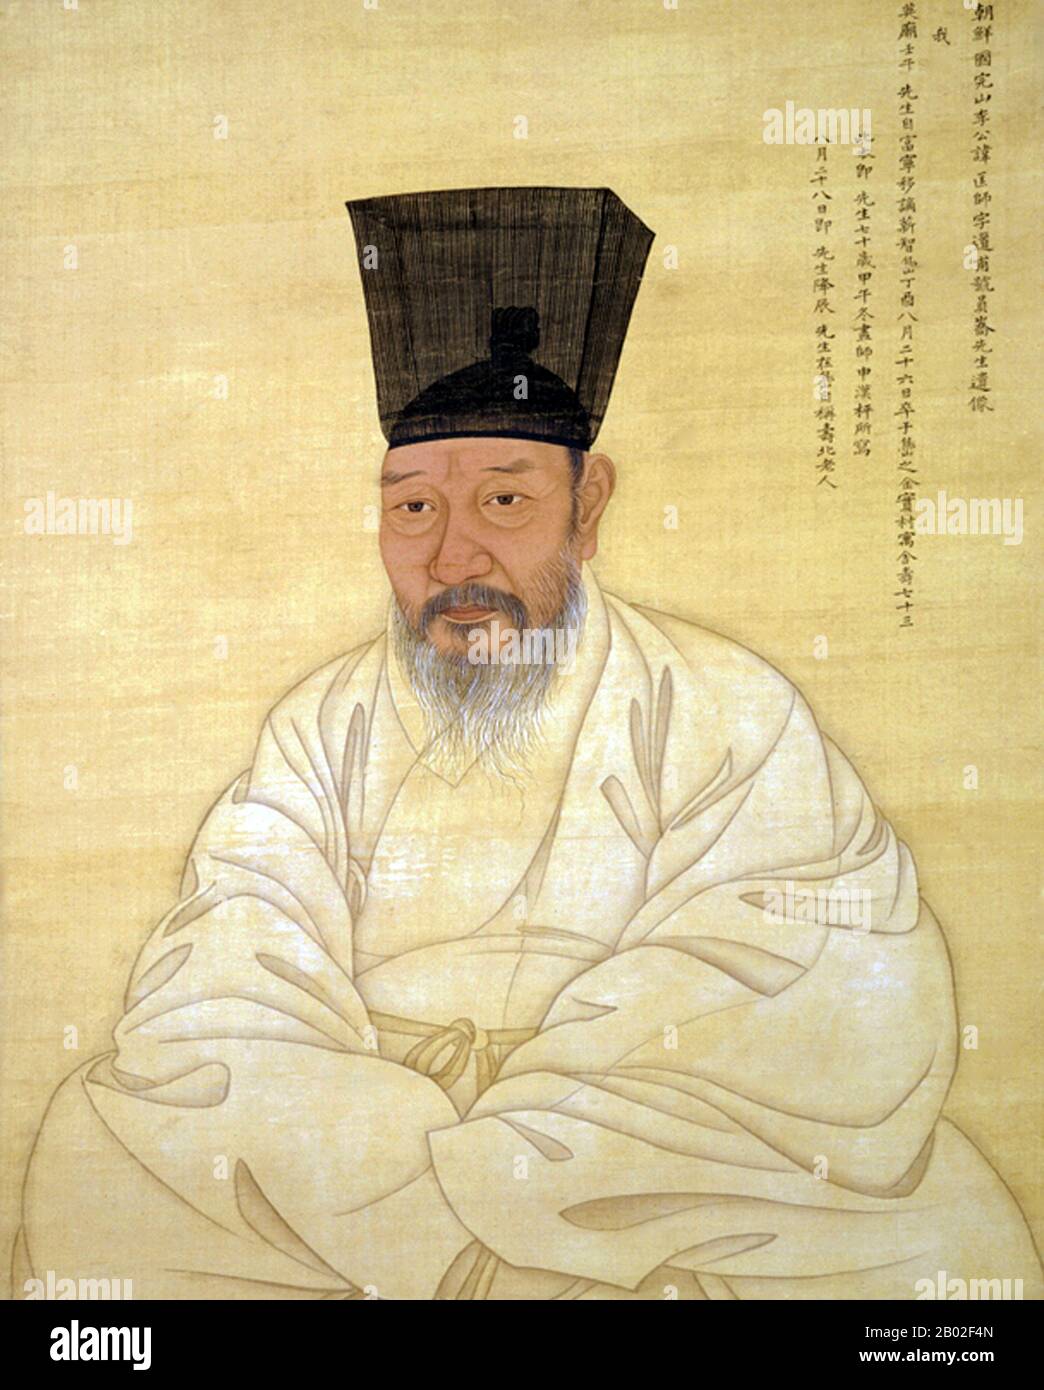 Yi Gwang-sa was one of the leading calligraphers of the Joseon period. He created a calligraphy style, called the 'Wongyo style' after his pen name, in an effort to establish an independent Korean style.  The colophon at top right reveals the portrait was painted in 1775, when Yi was 70 years old, by court painter Shin Han-pyeong, father of the famous genre painter Shin Yun-bok. Stock Photo